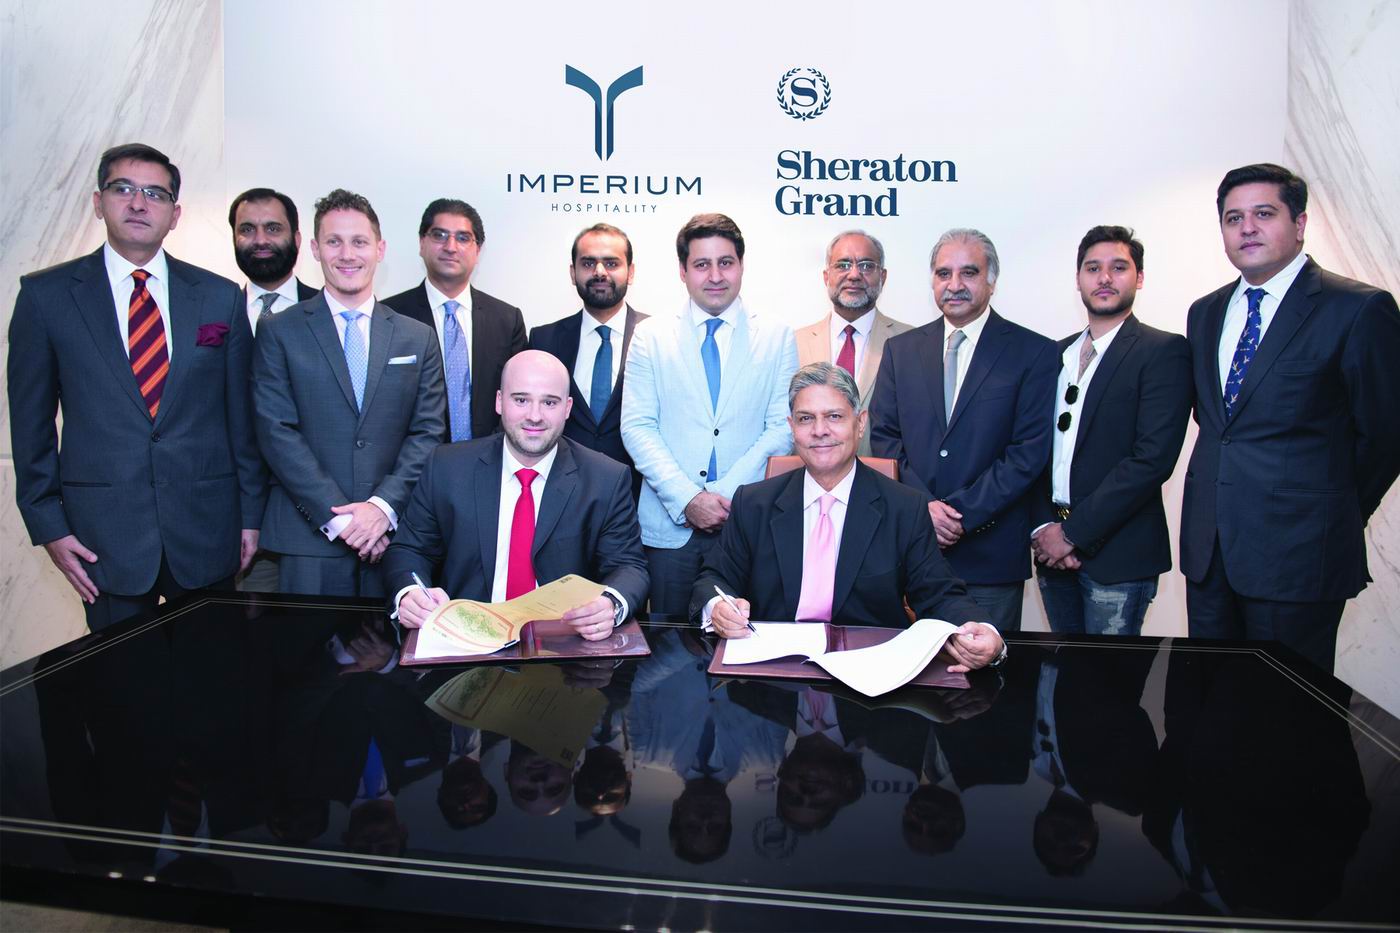 MARRIOTT INTERNATIONAL EXPANDS PRESENCE IN PAKISTAN WITH SIGNING OF SHERATON GRAND LAHORE